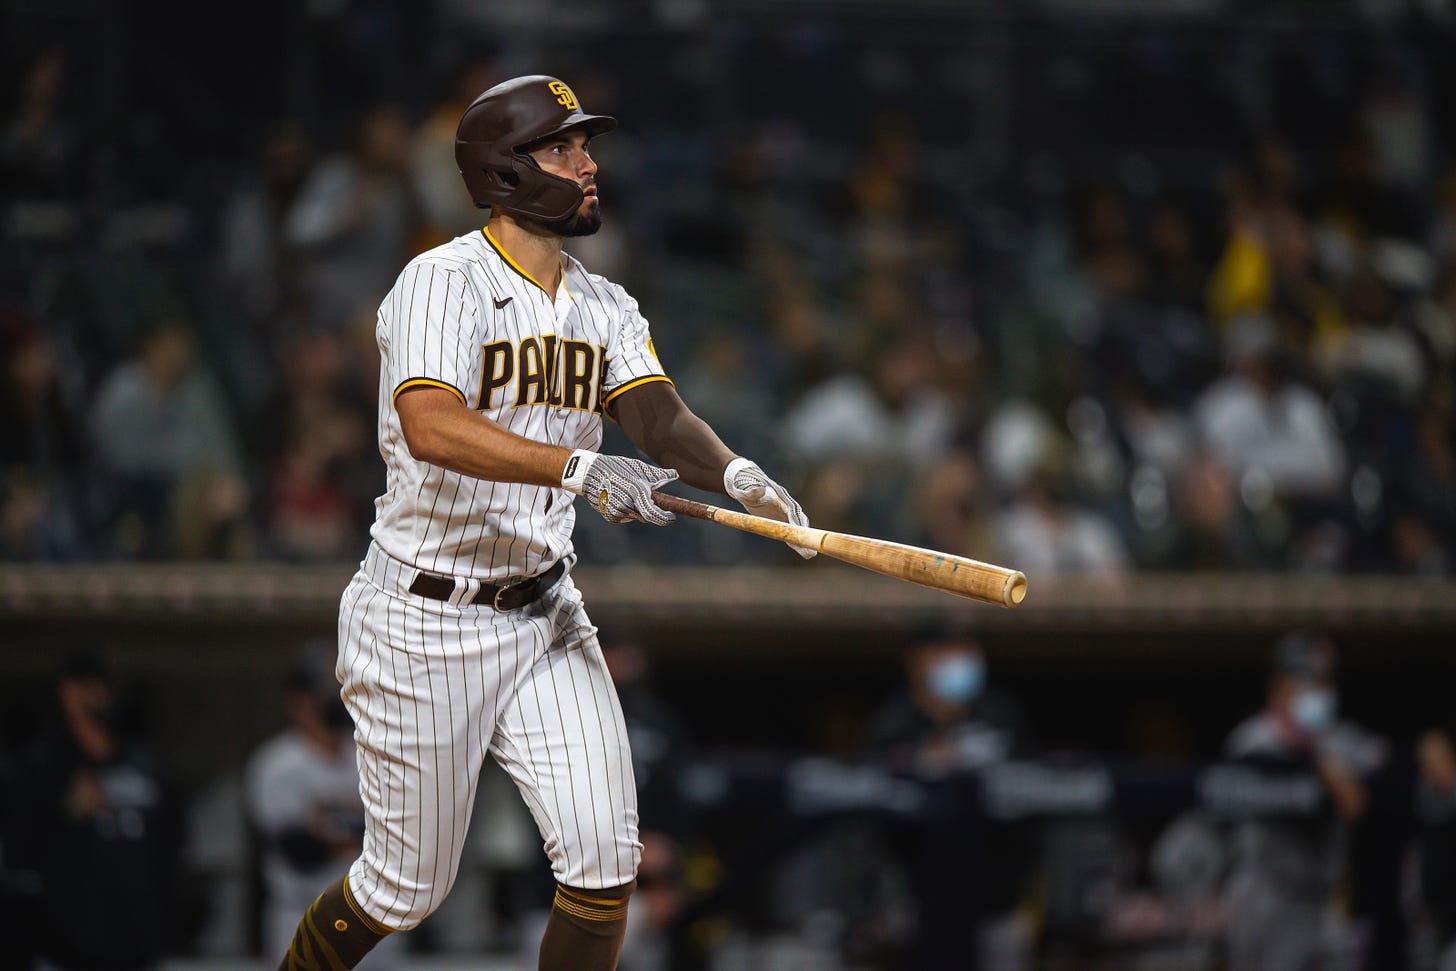 Padres: Eric Hosmer is playing like a man on a mission